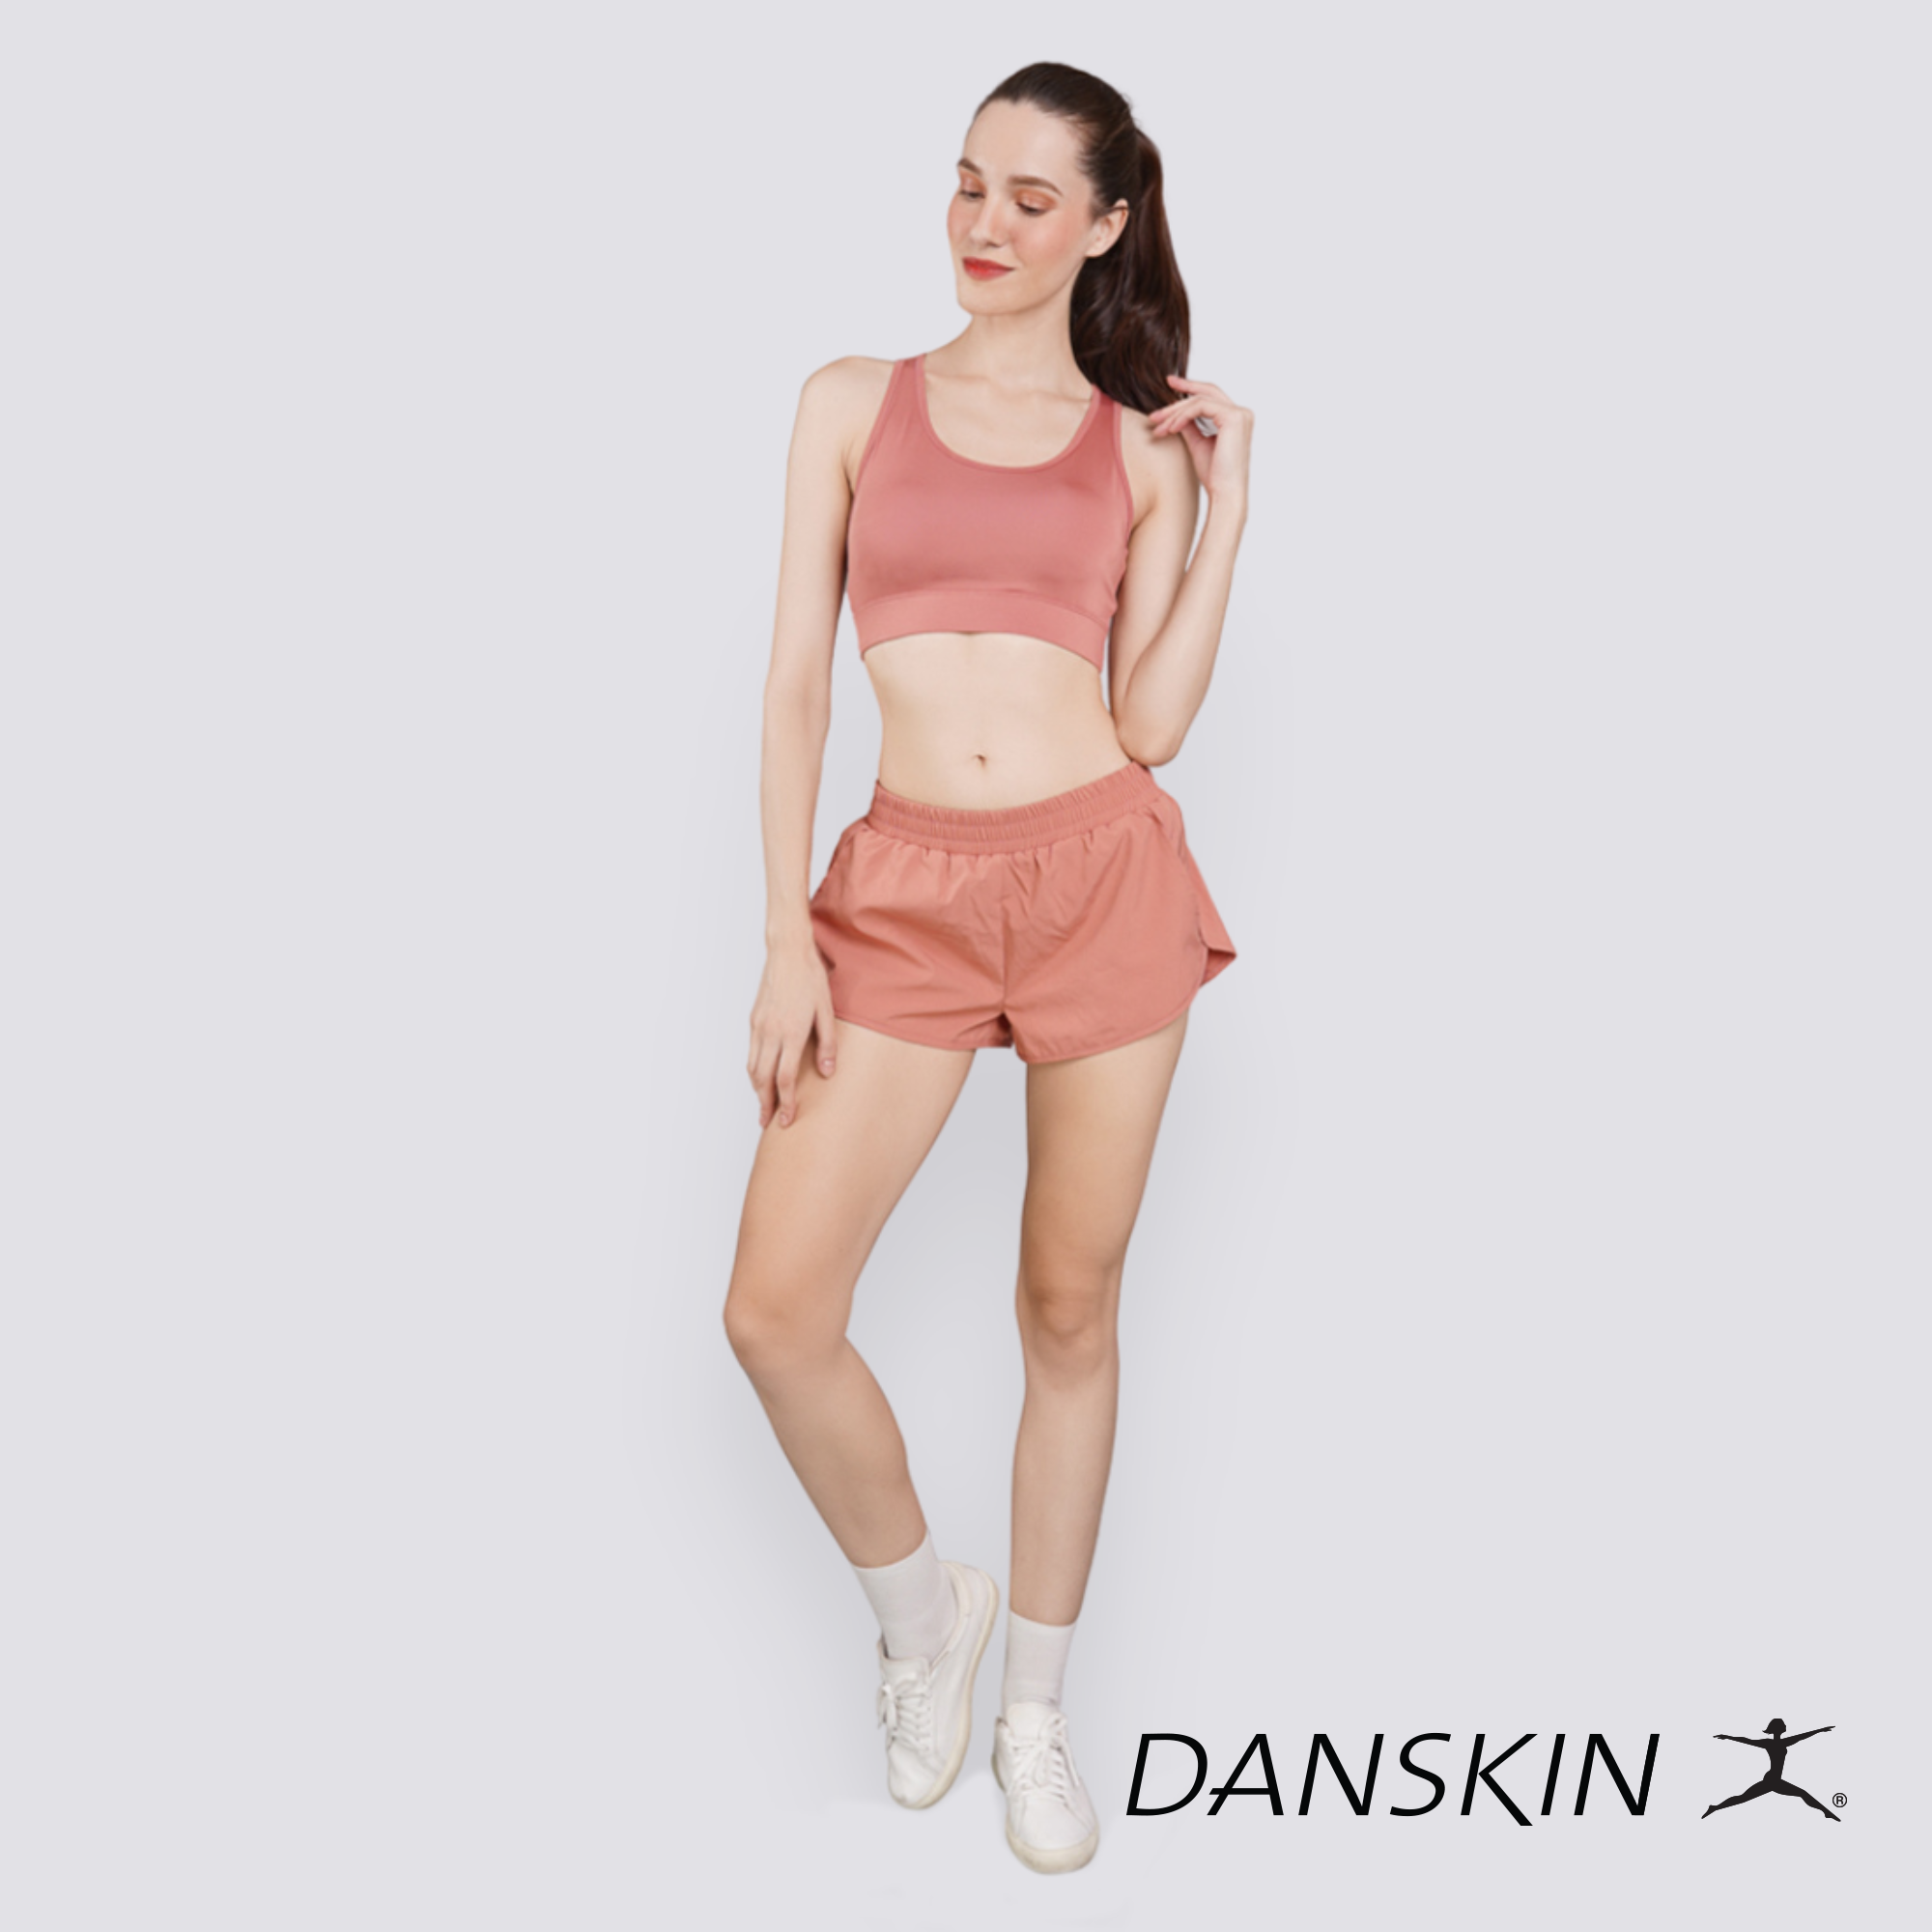 Danskin Crunches Fitness Sports Bra with Removable Pads Women Activewear